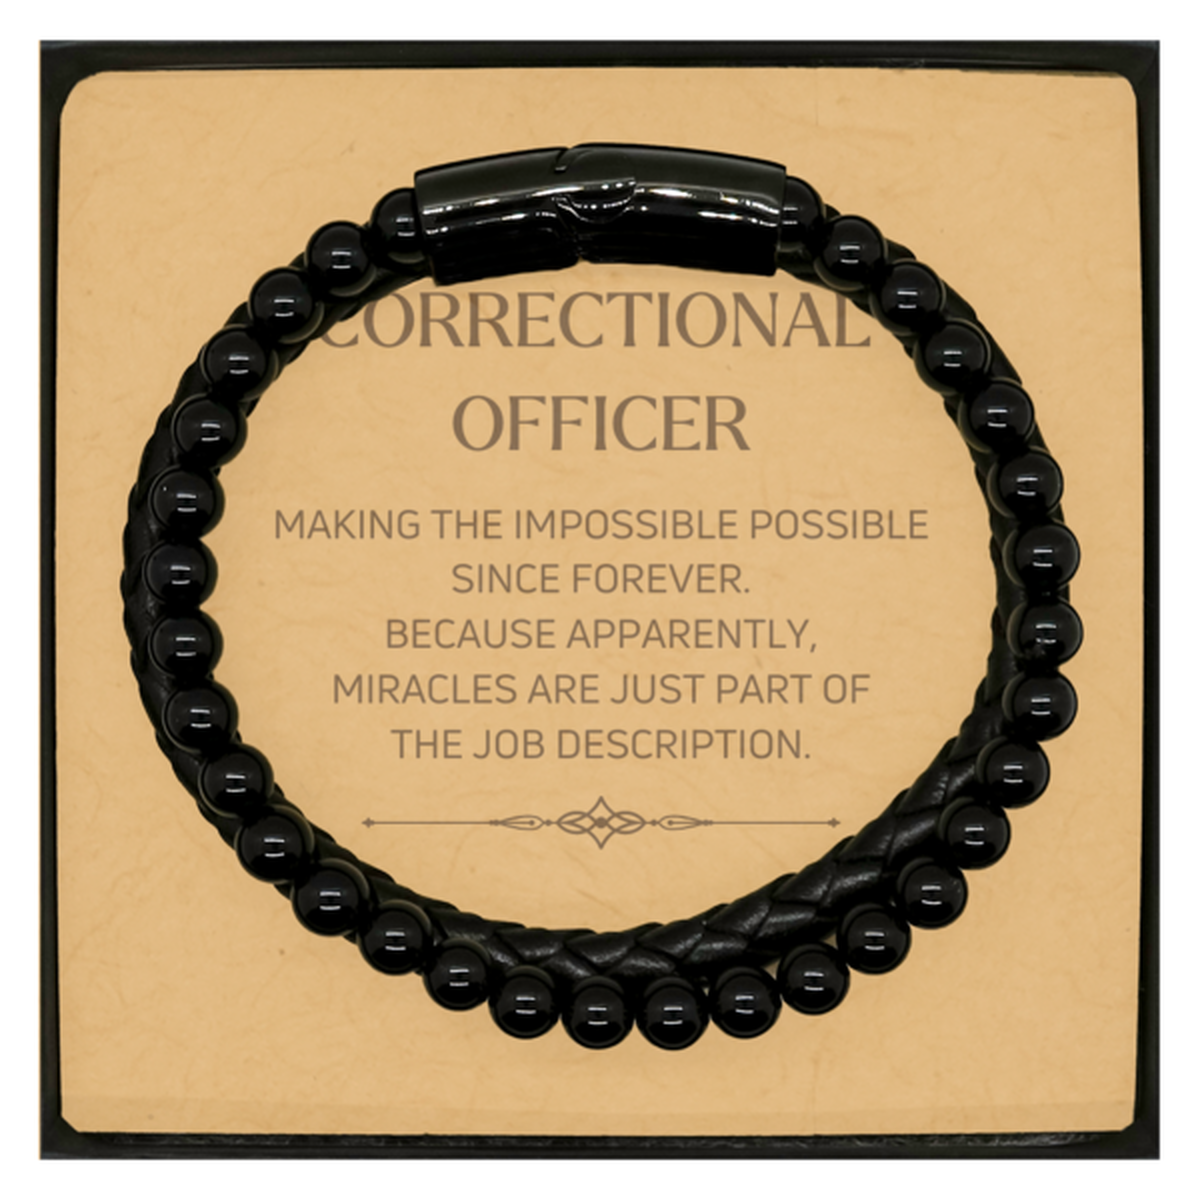 Funny Correctional Officer Gifts, Miracles are just part of the job description, Inspirational Birthday Christmas Stone Leather Bracelets For Correctional Officer, Men, Women, Coworkers, Friends, Boss